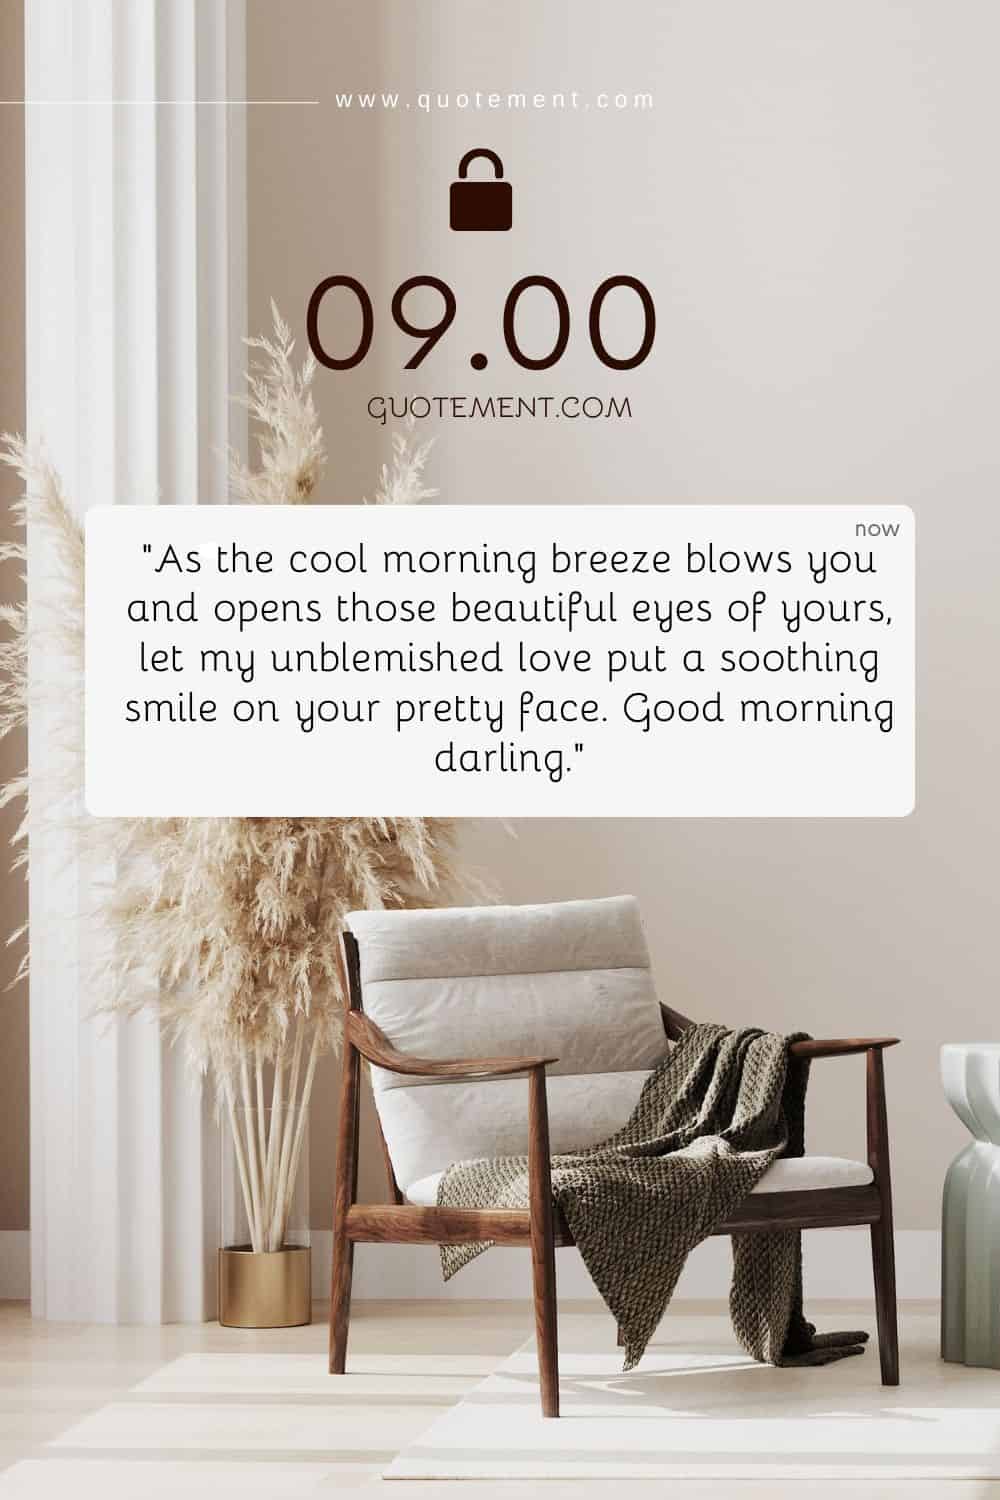 message overlay on a warm, inviting home screen